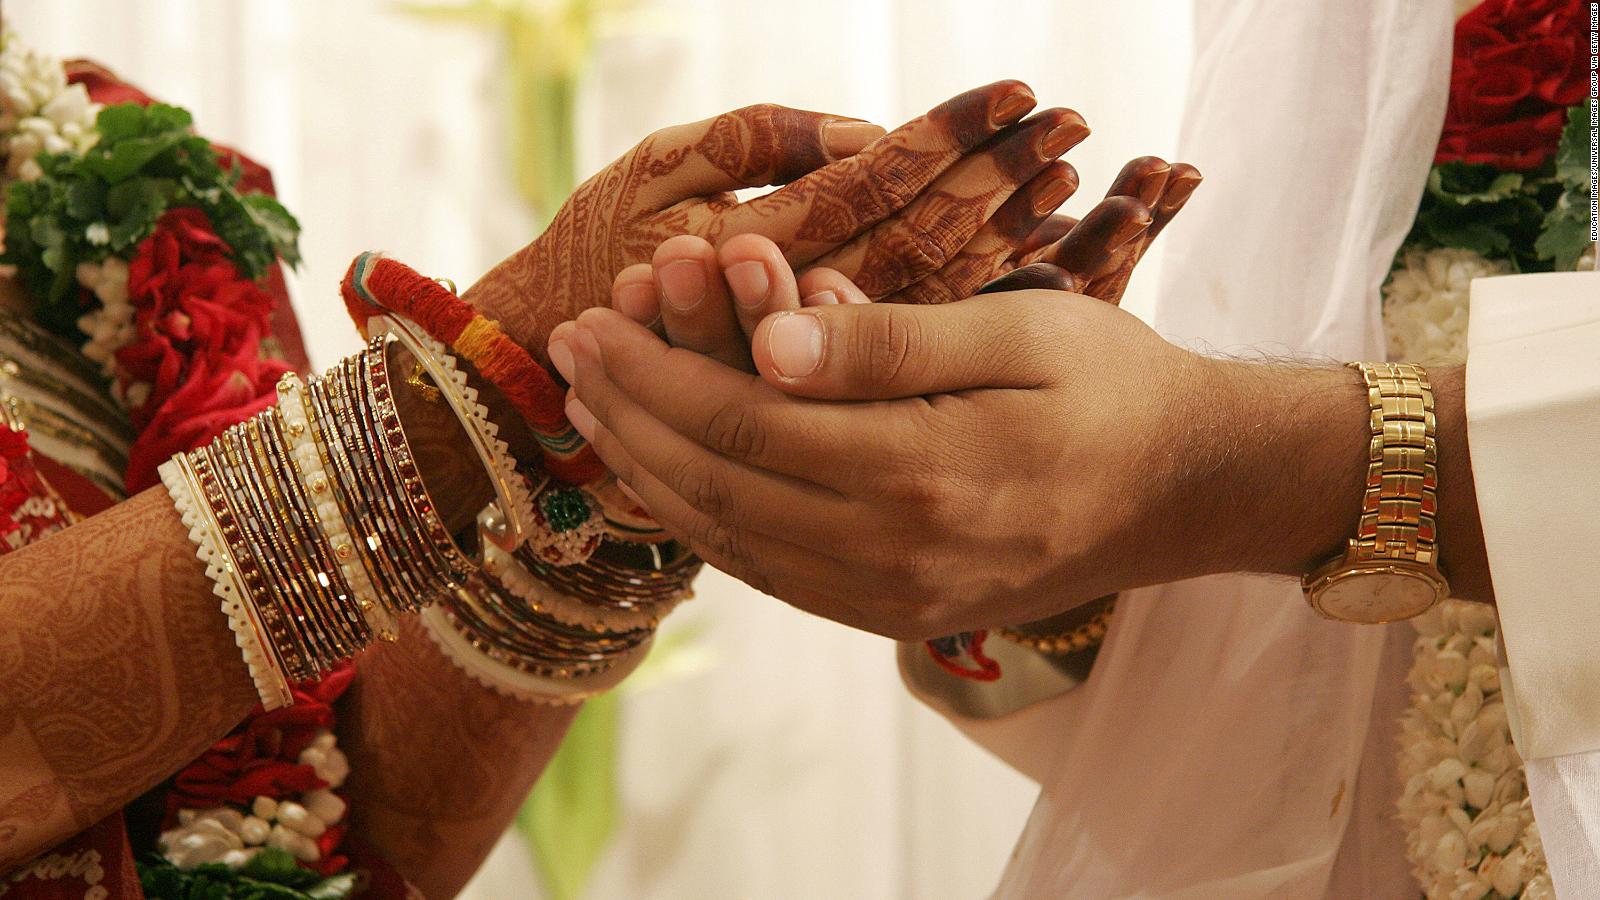 divorce rate of arranged marriages in india